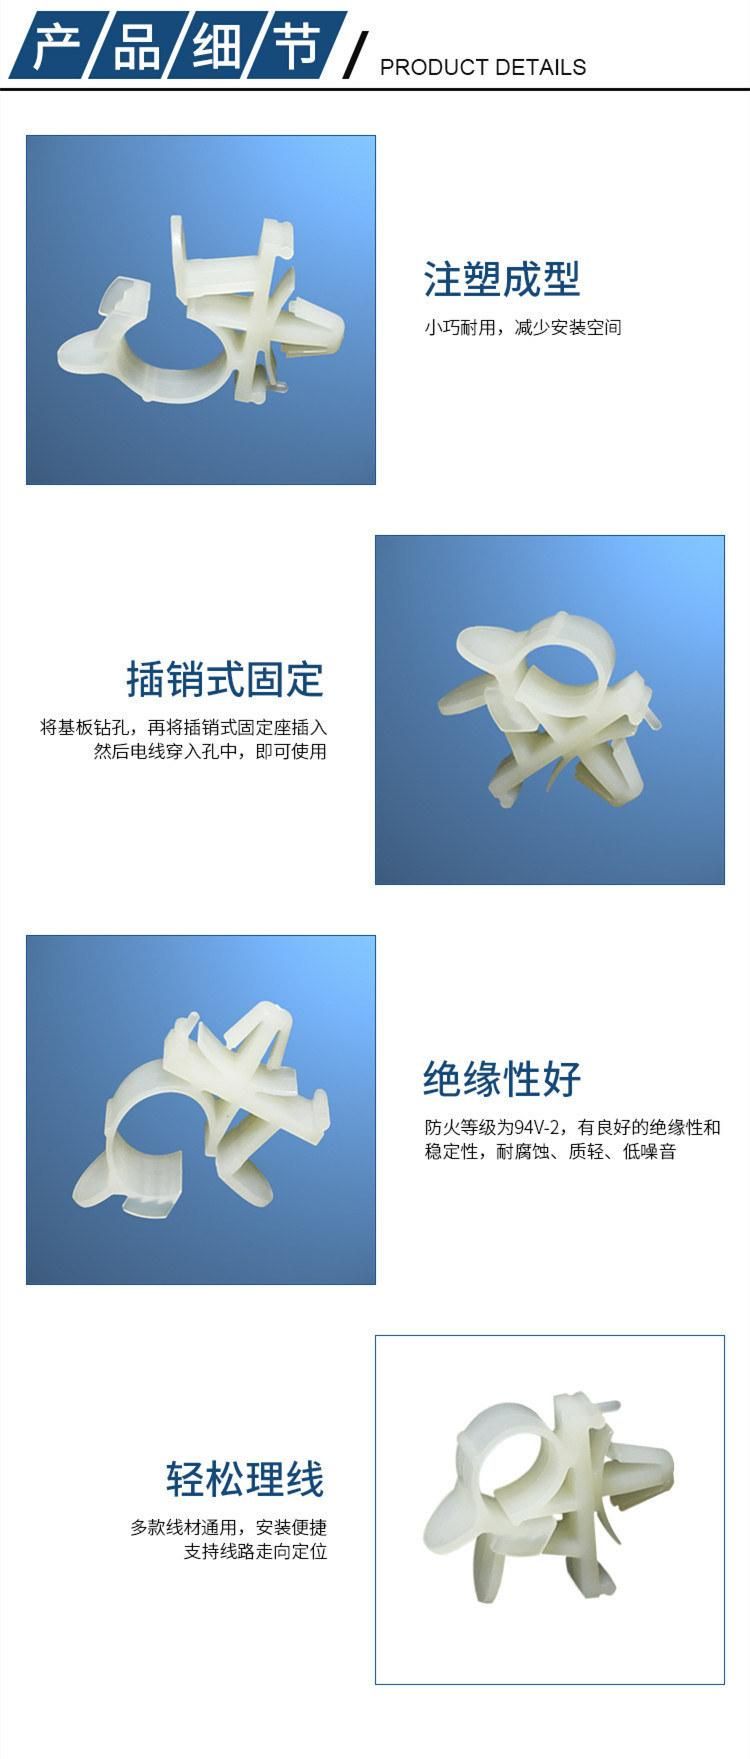 Plastic Cable Fasten Saddle Adjustable Cable Fixing, Heyingcn Plastic Injection Clip Buckle Nylon Wire Clip